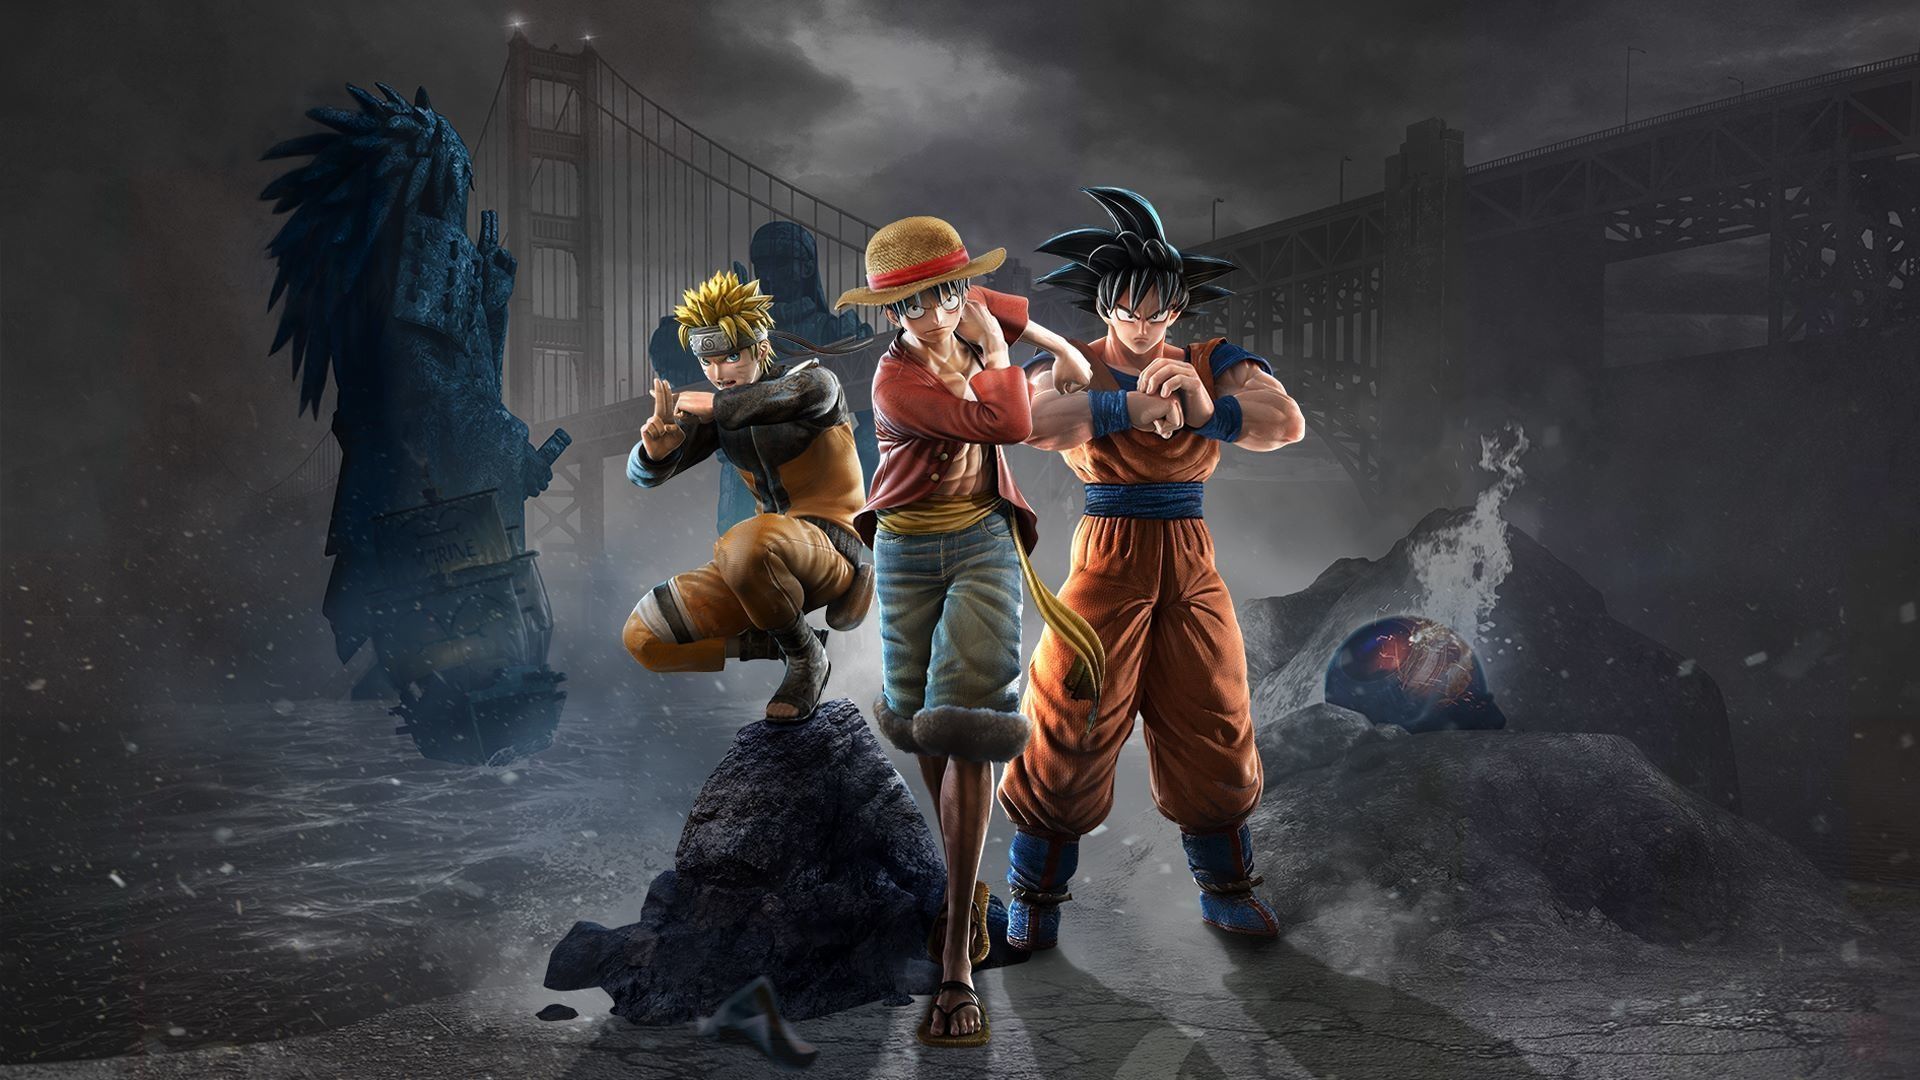 Desktop wallpaper anime, jump force, naruto, dragon ball, one piece, video game, HD image, picture, background, c32a49